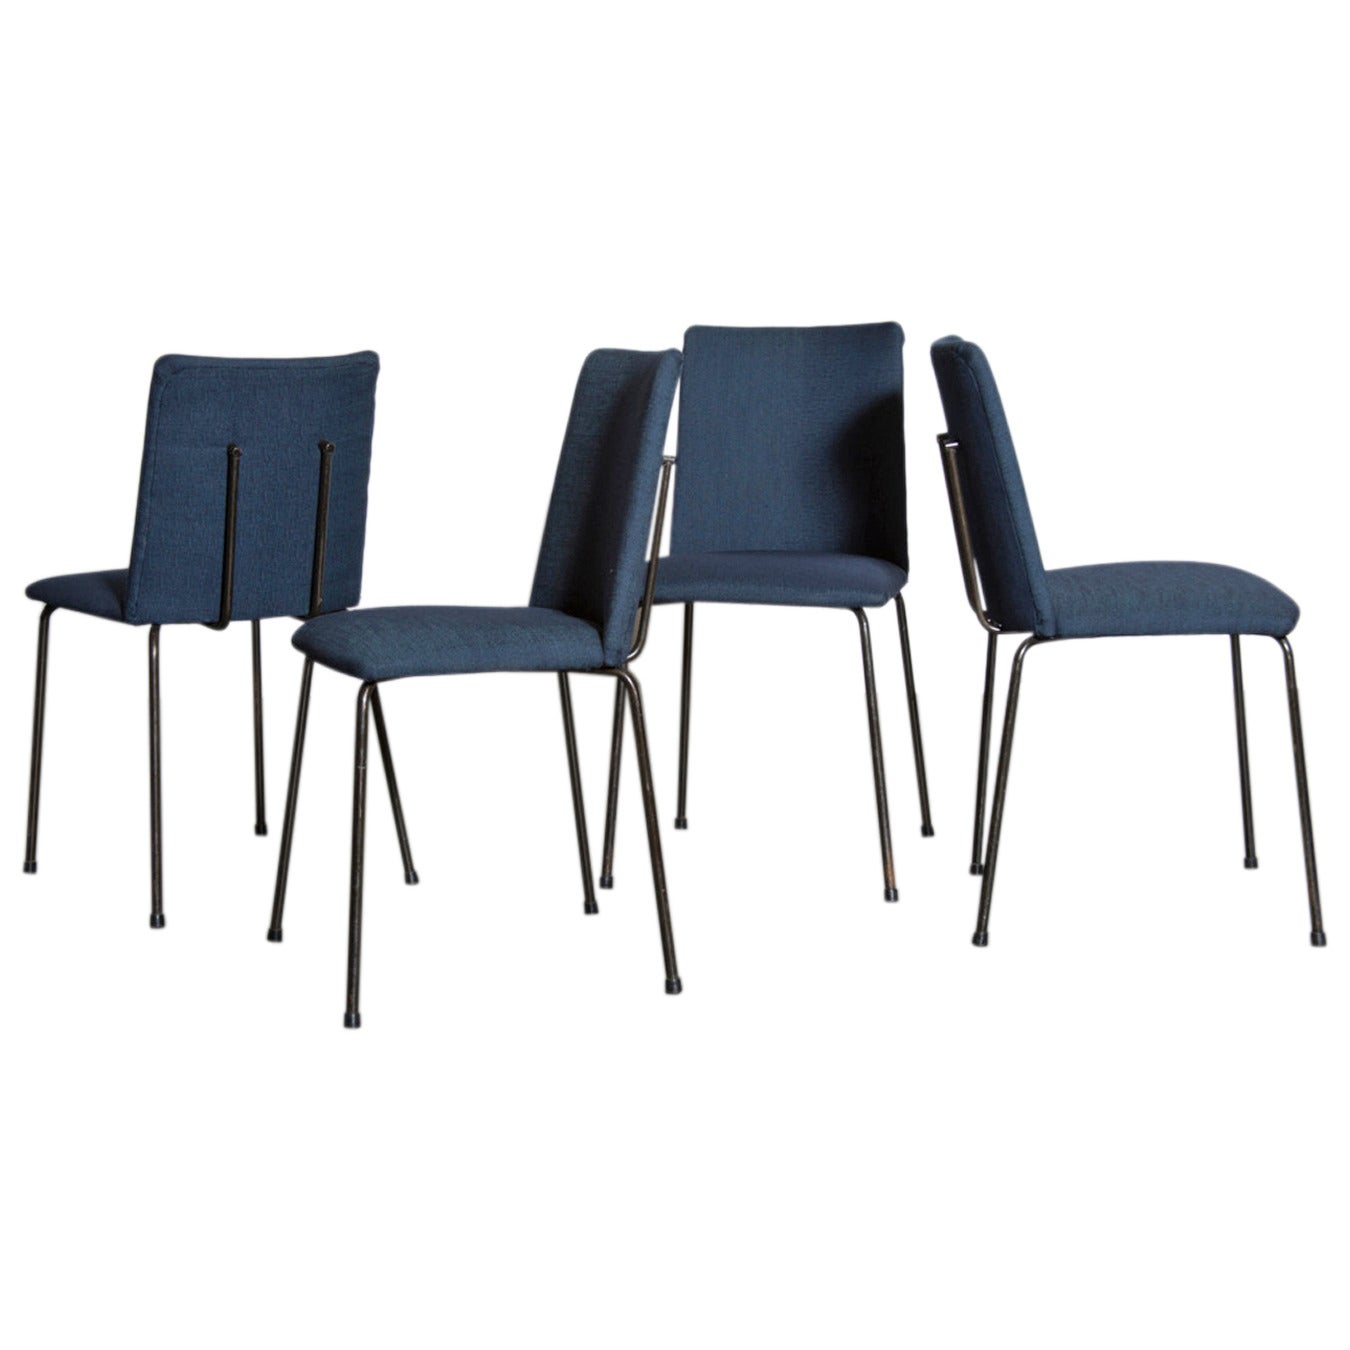 Set of 4 Minimalist AP Originals Dining or Office Chairs